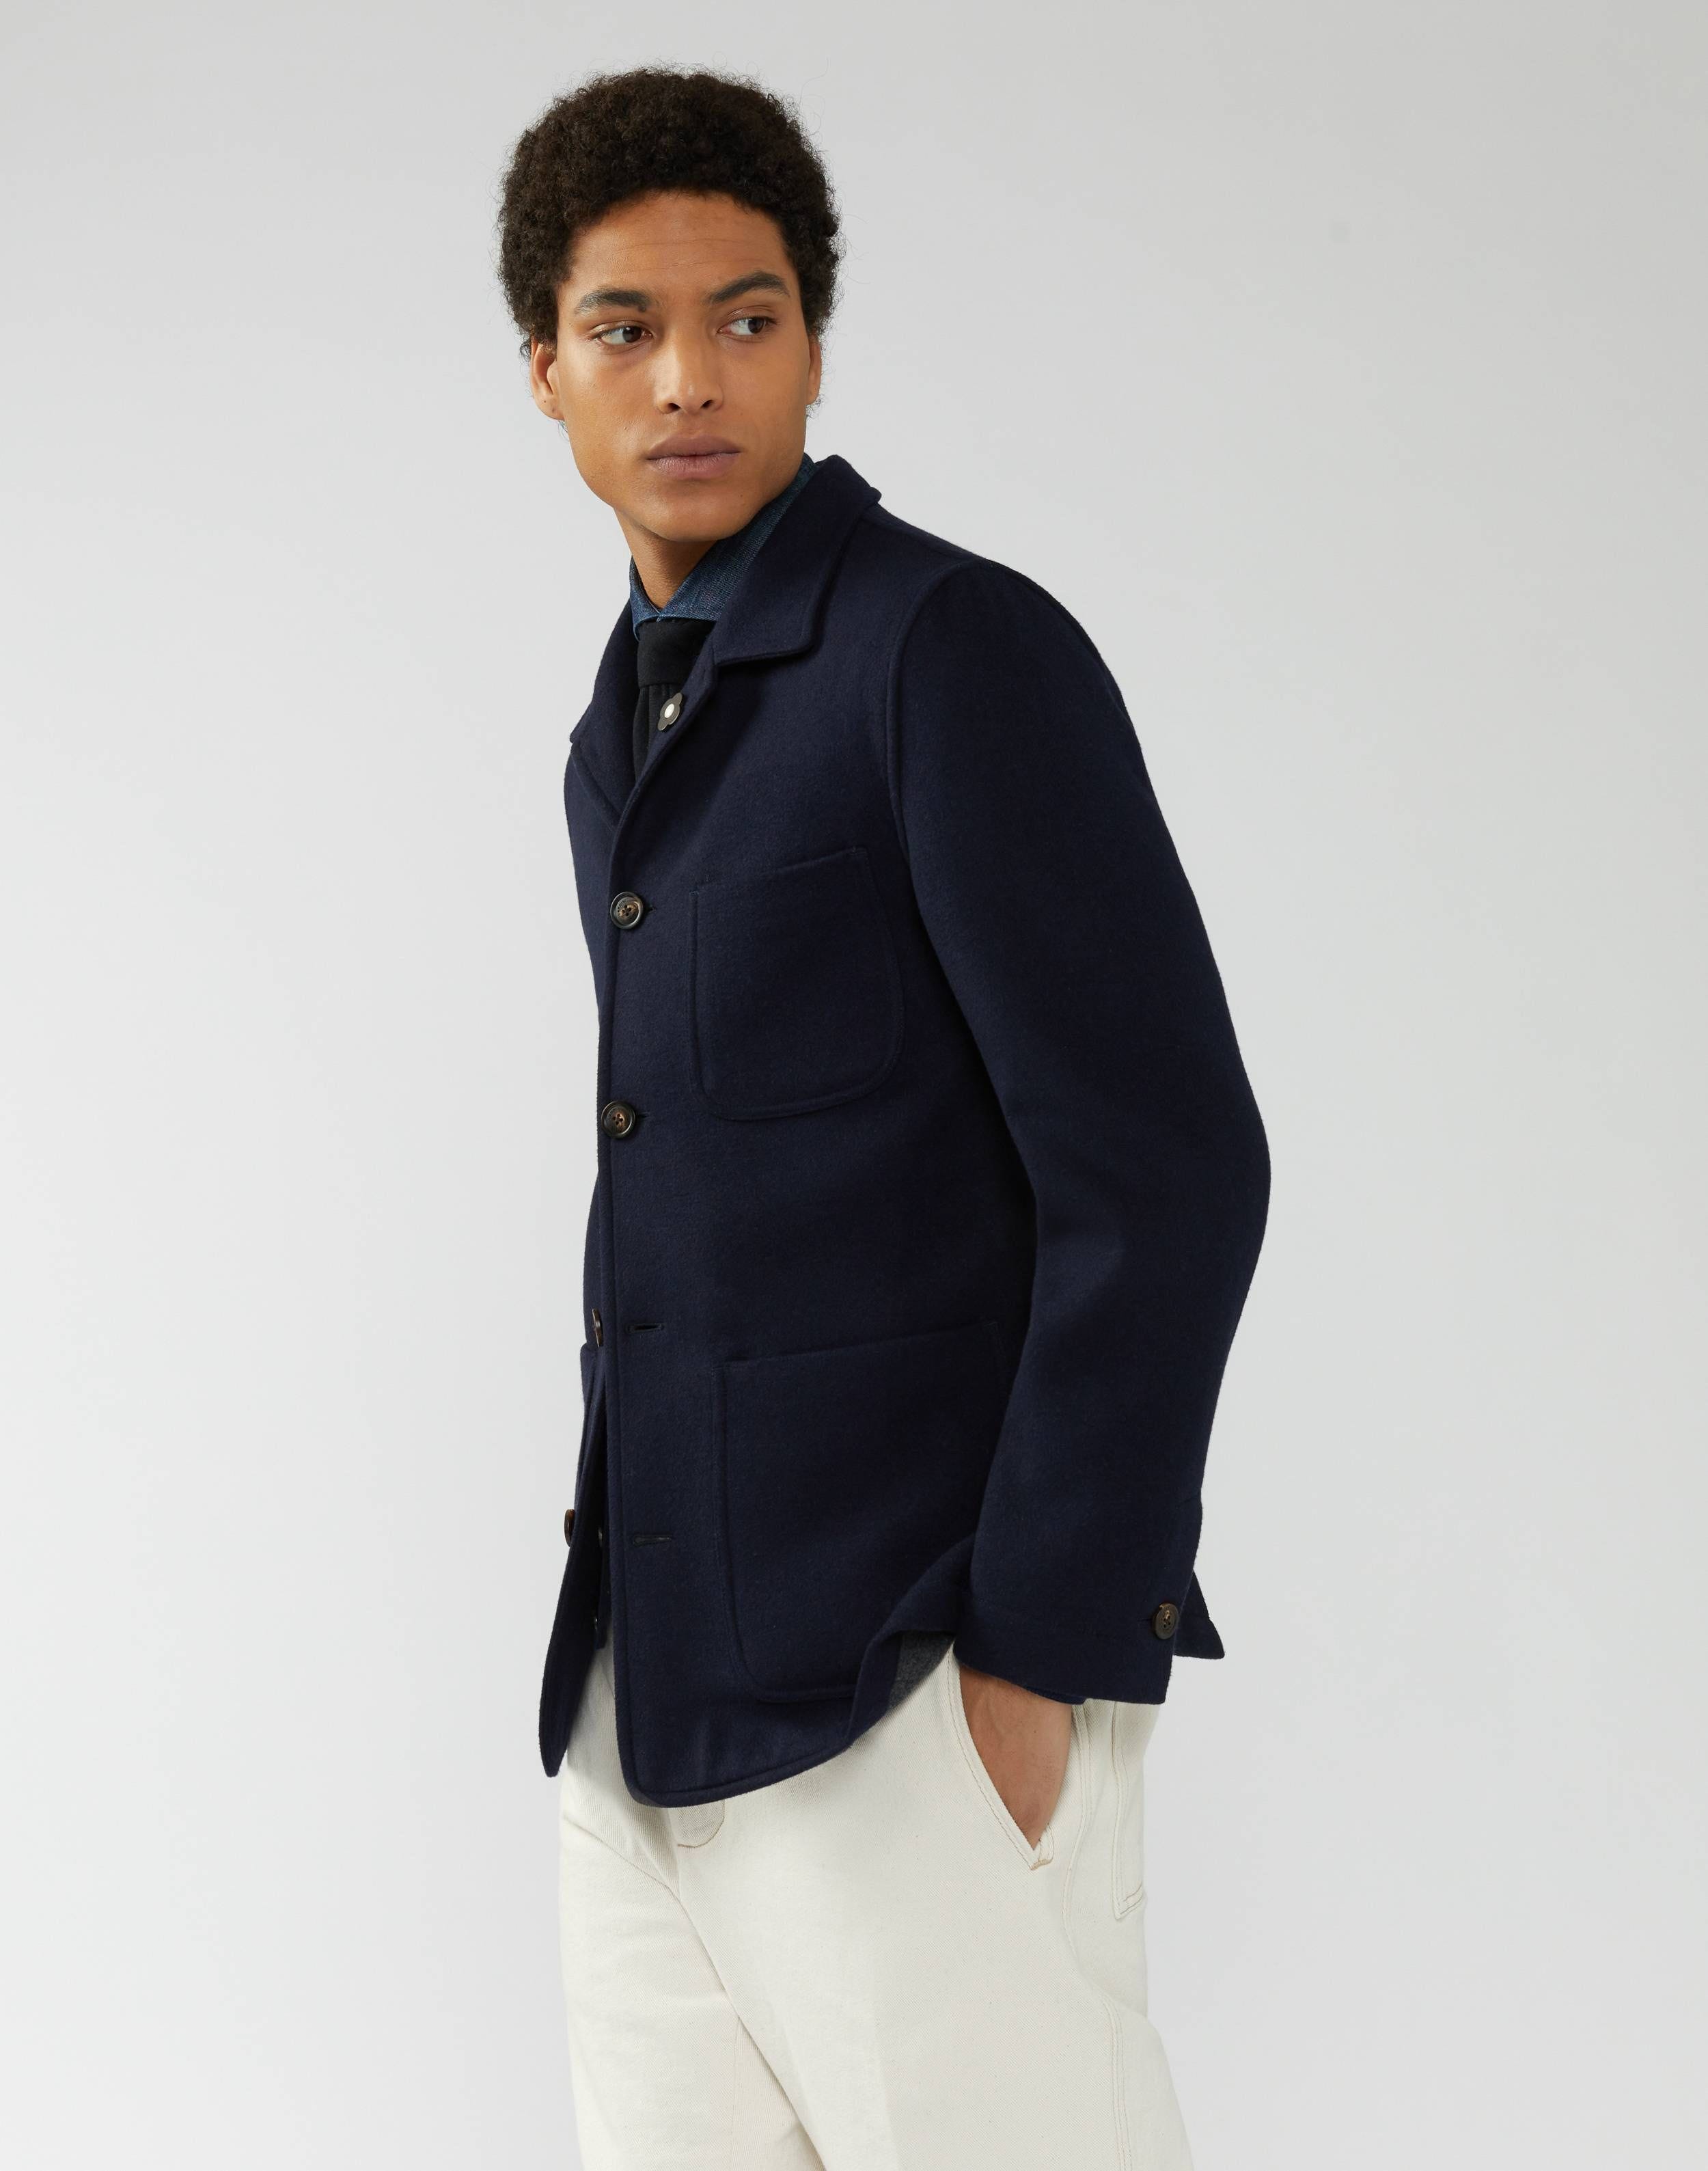 Blue shirt jacket in wool, cashmere and silk